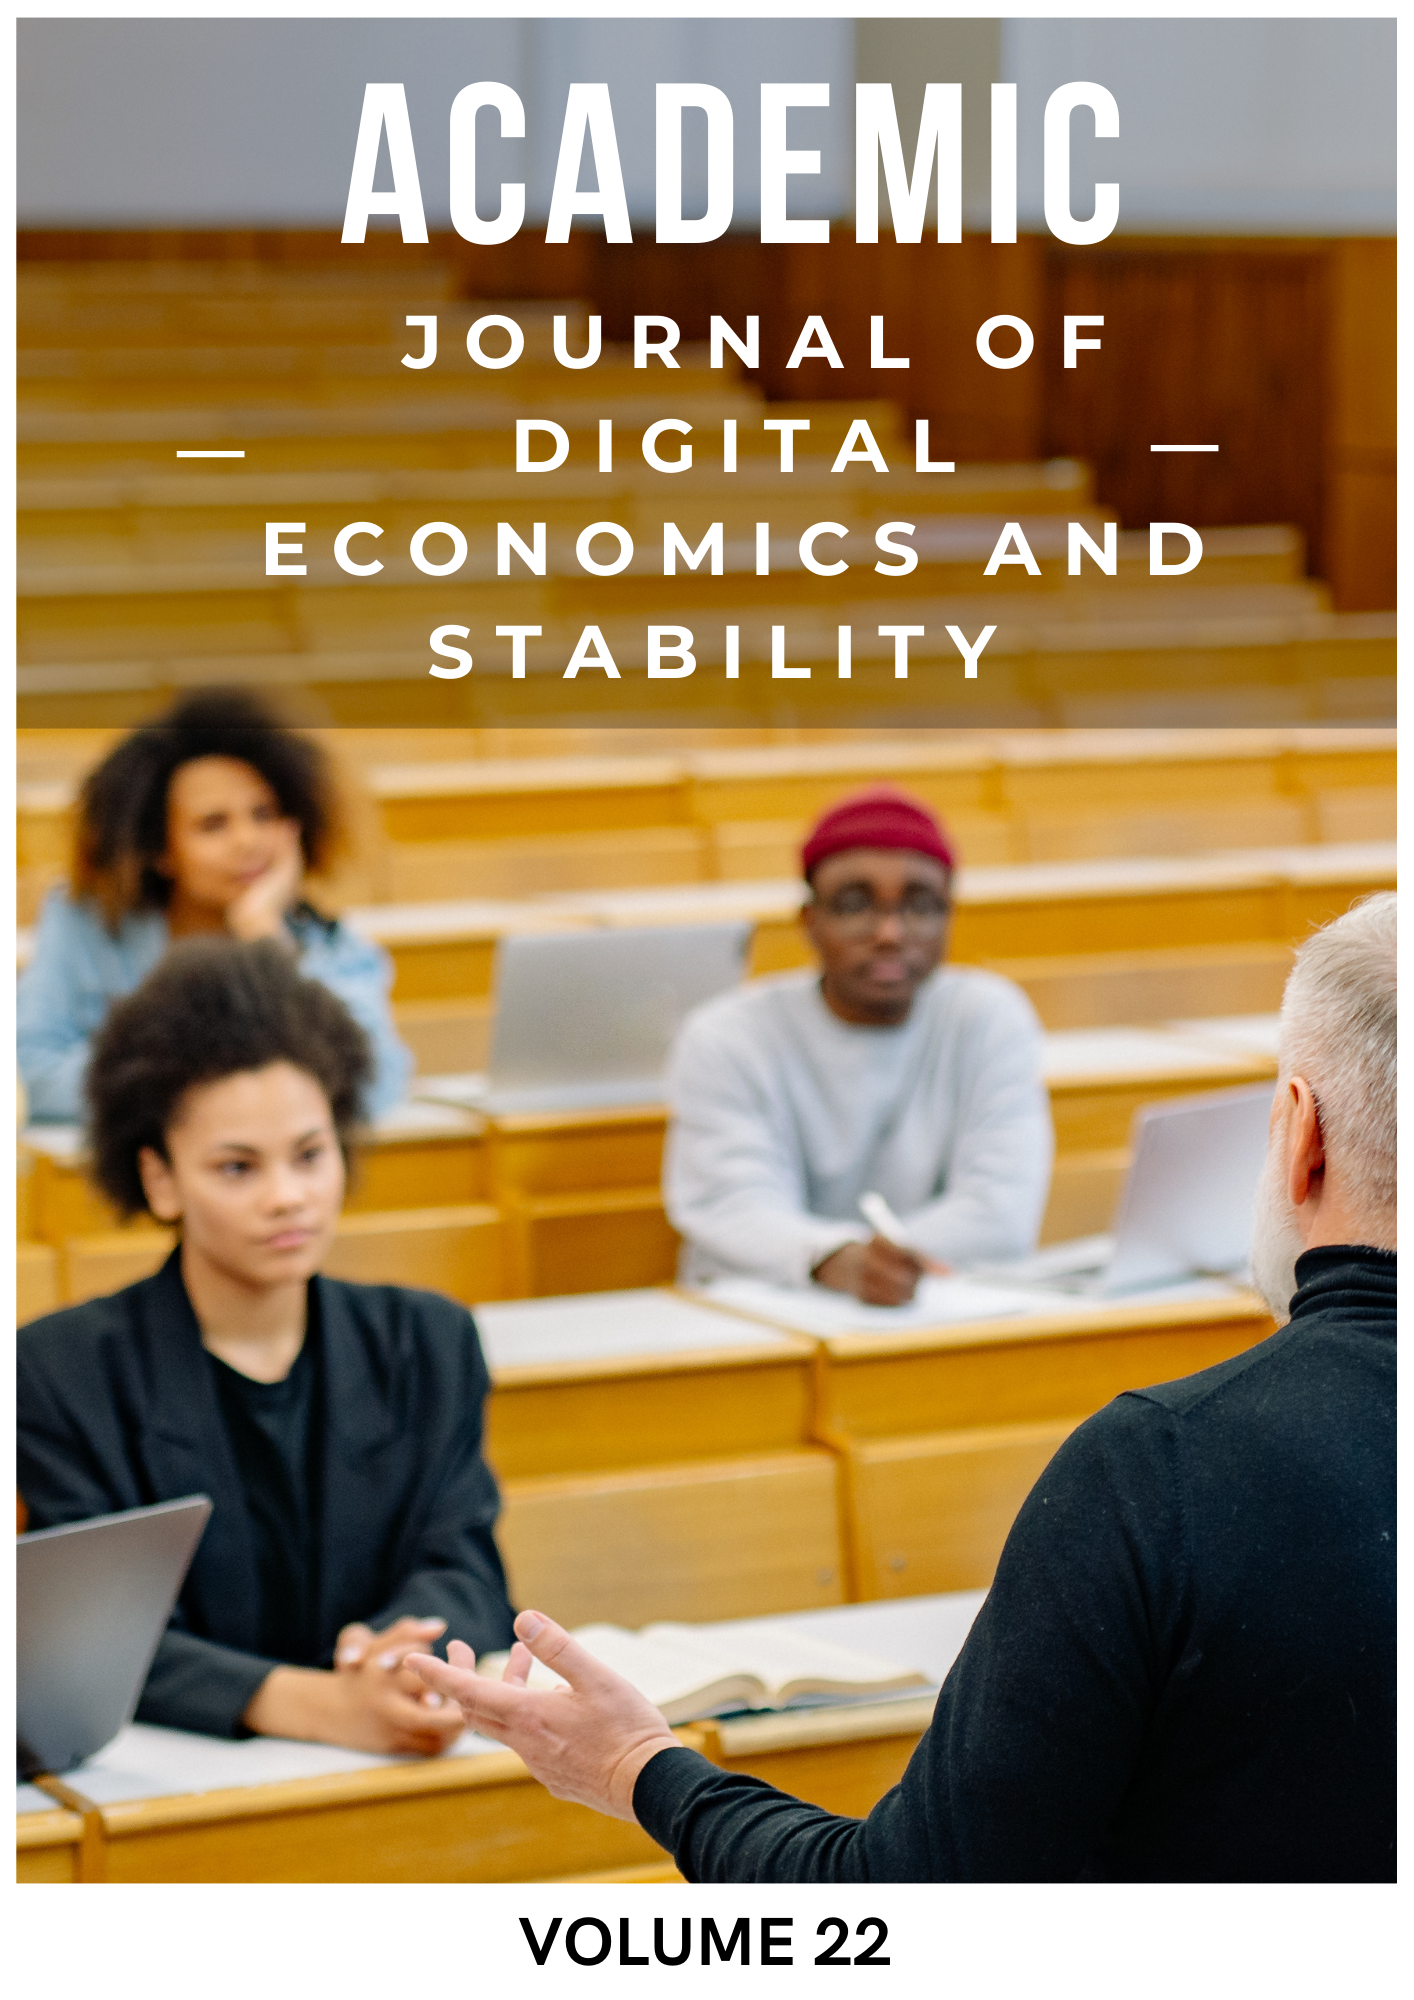 					View Vol. 22 (2022): Academic Journal of Digital Economics and Stability
				